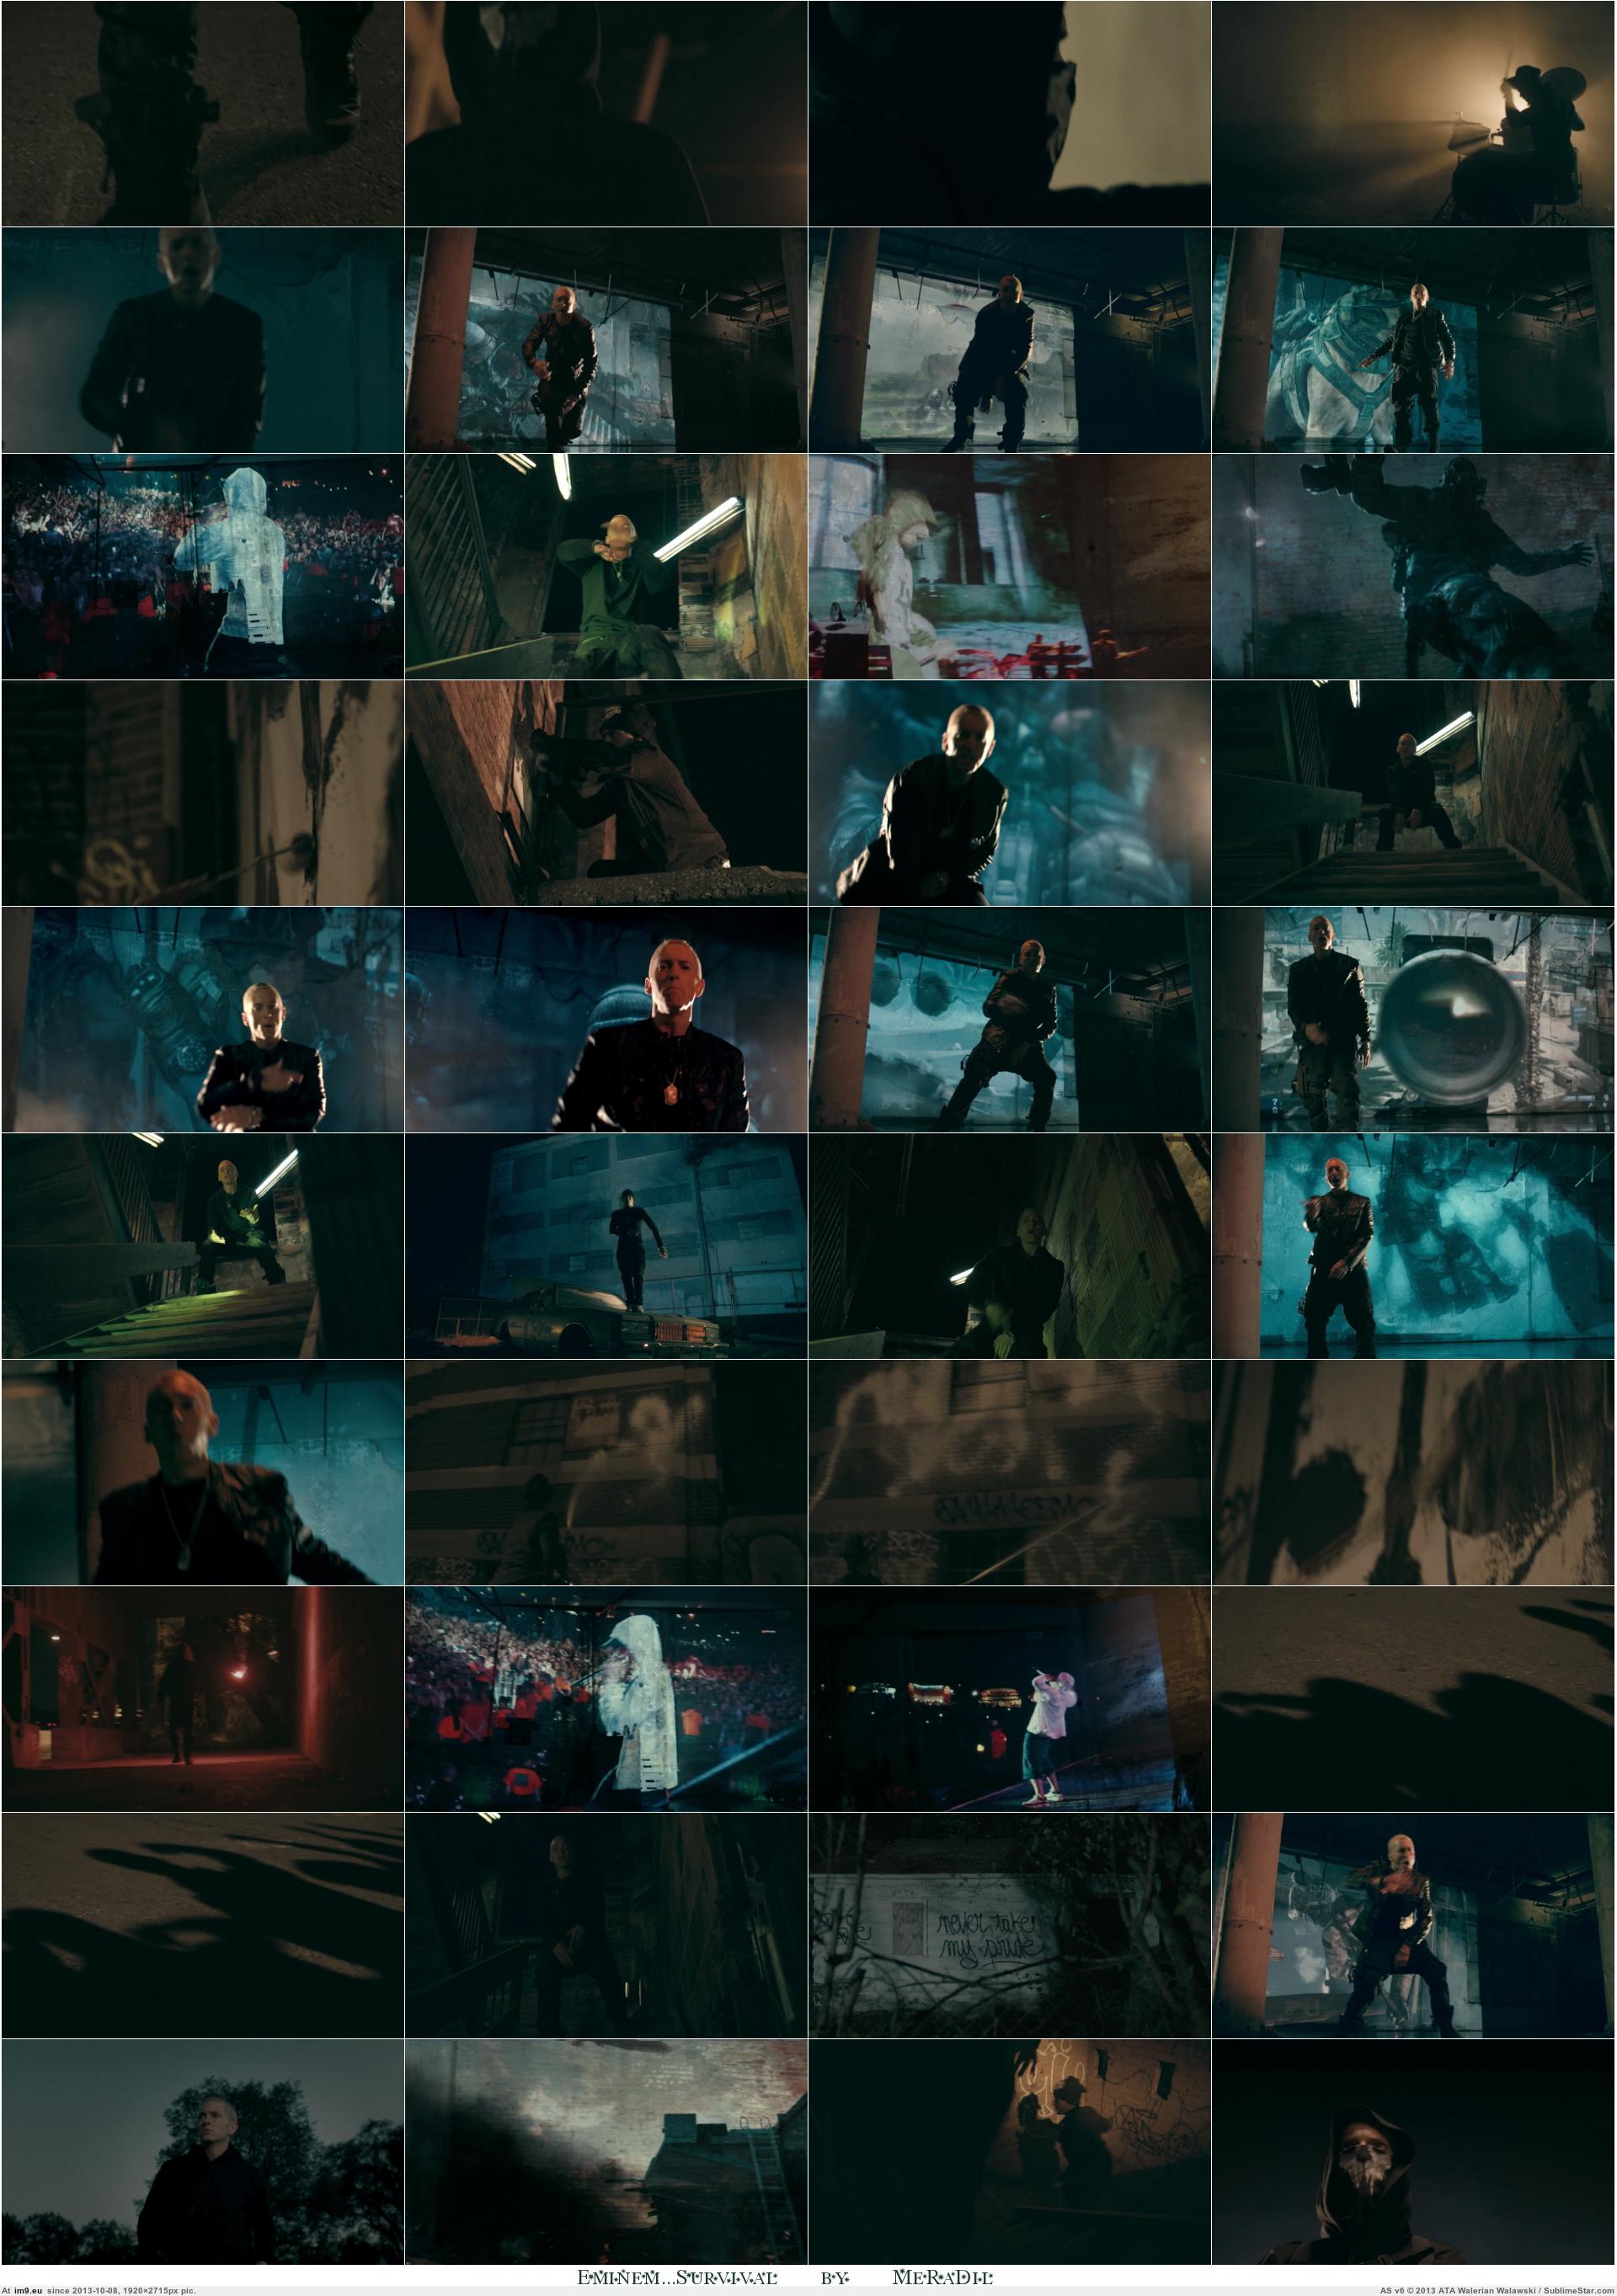 Eminem - Survival (Explicit) Call of Duty Ghosts preview 1